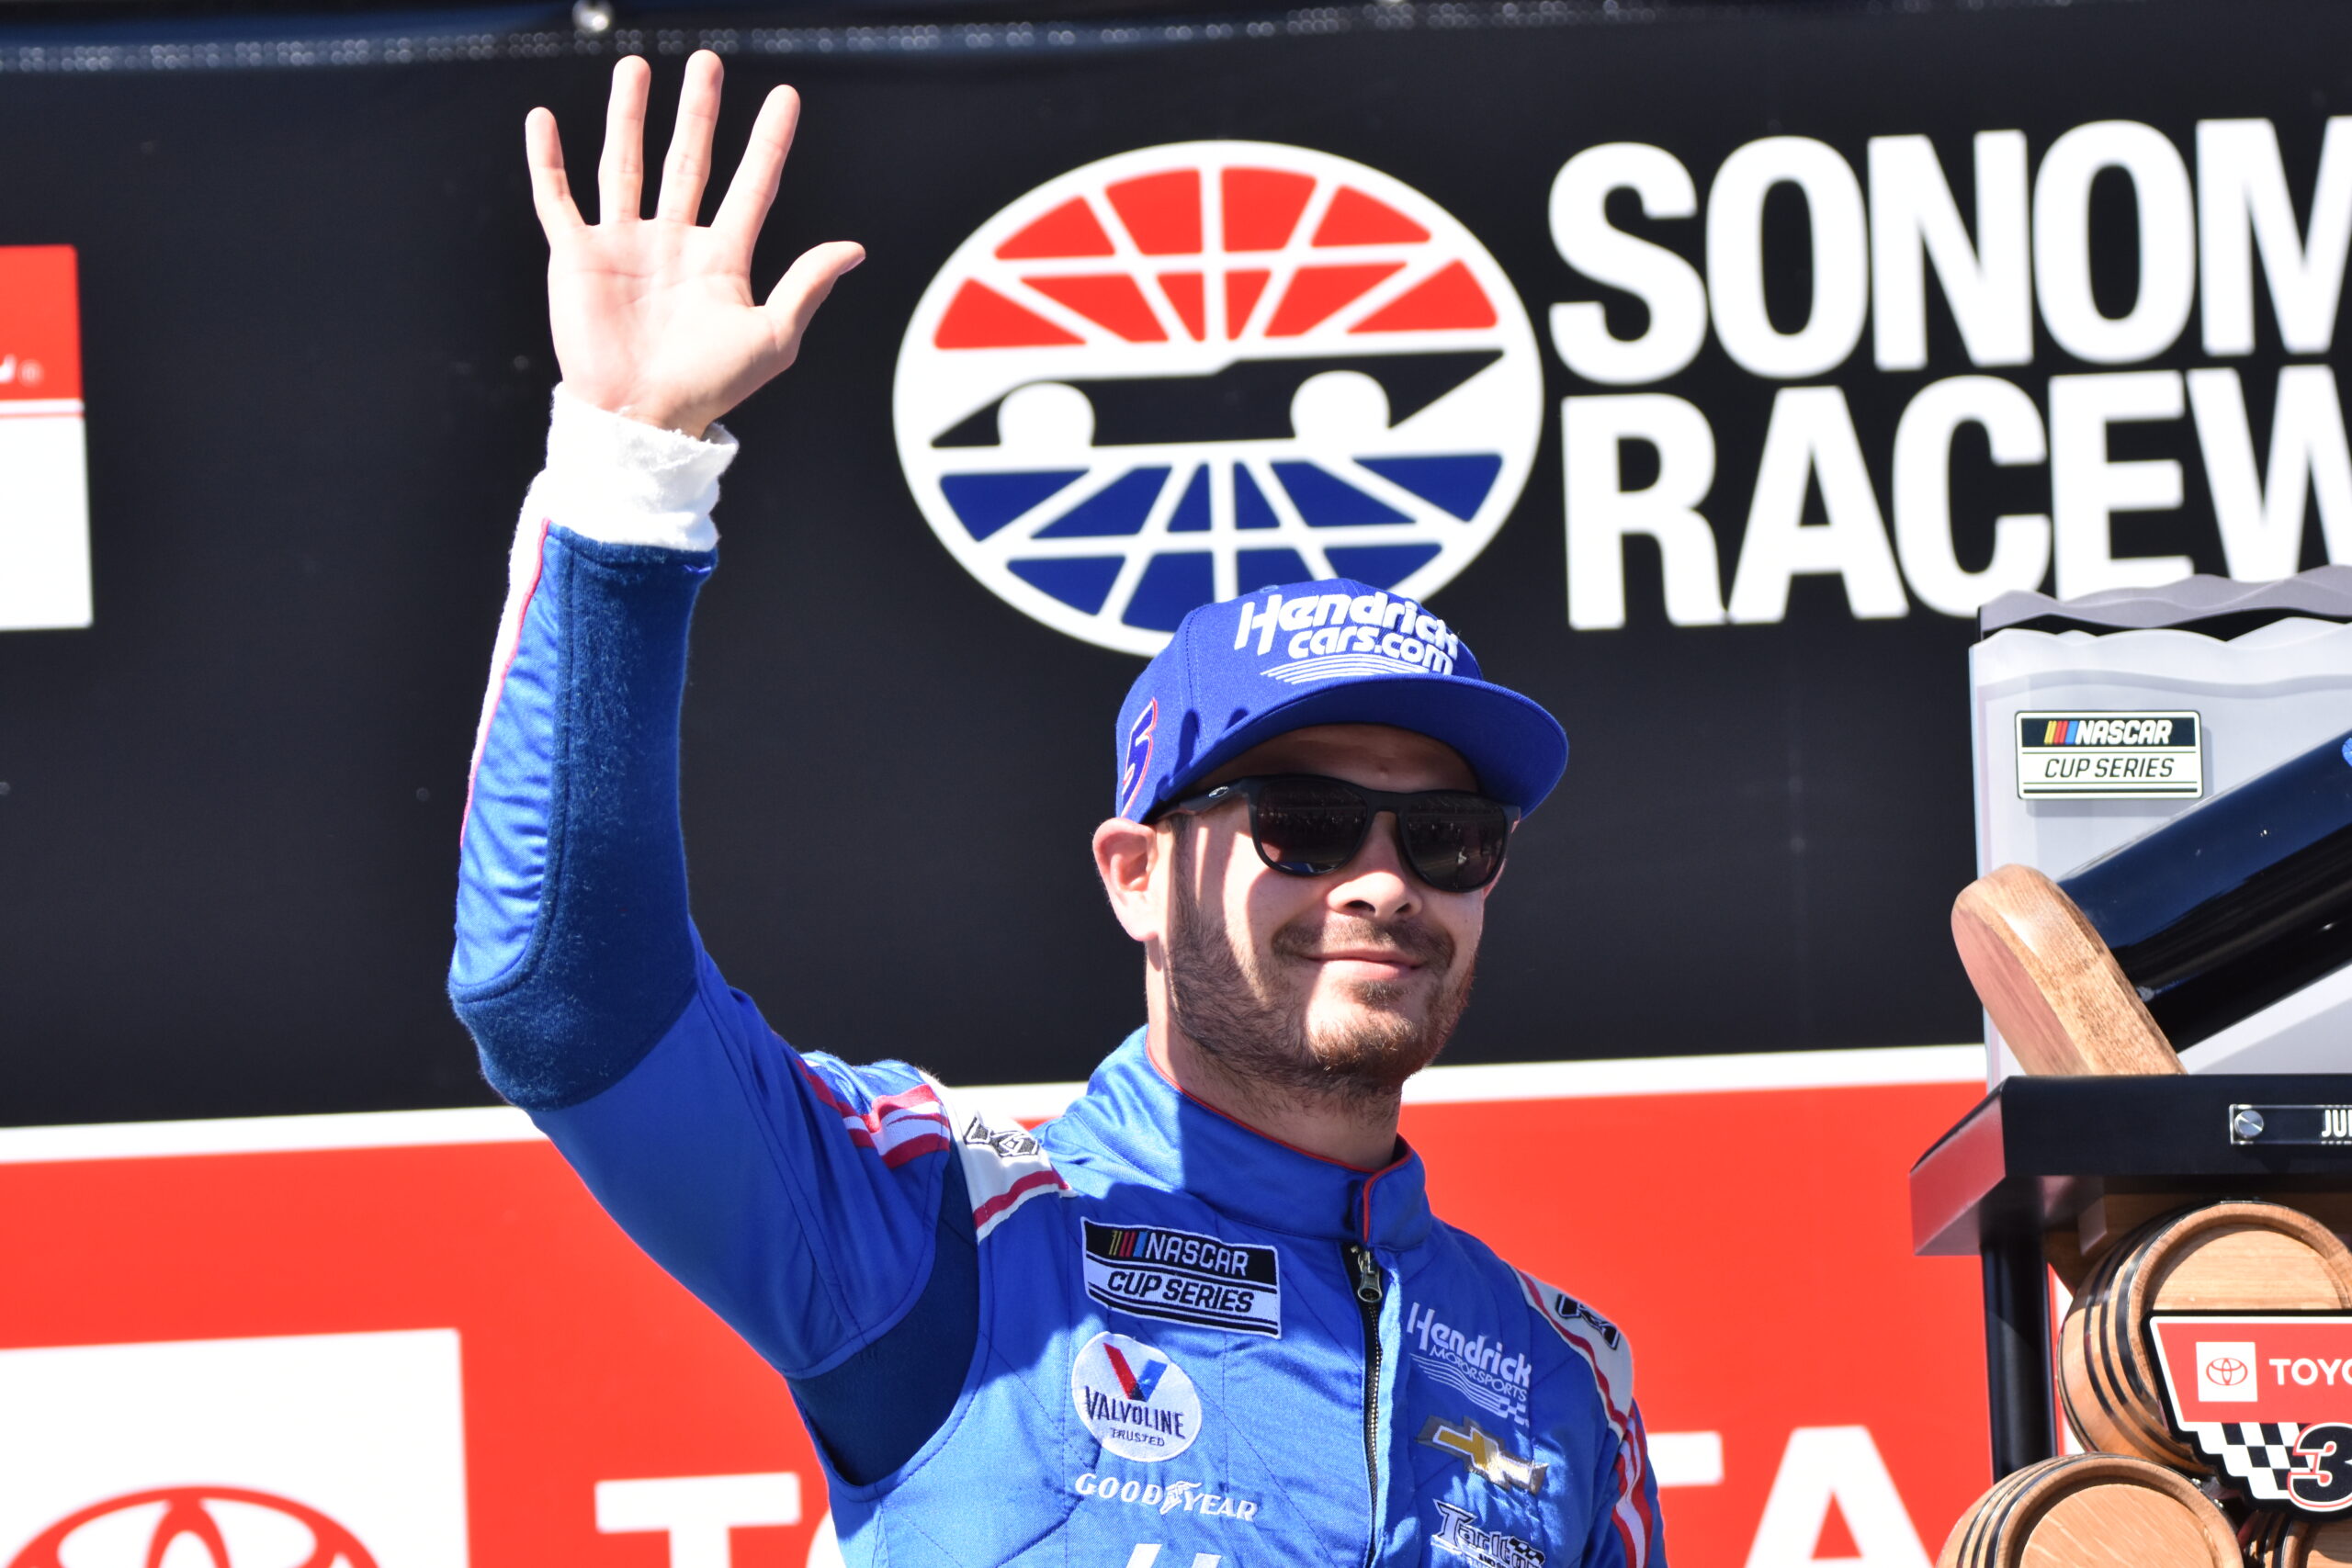 In summary, Kyle Larson looks like the driver to beat. (Photo: Luis Torres/The Podium Finish)